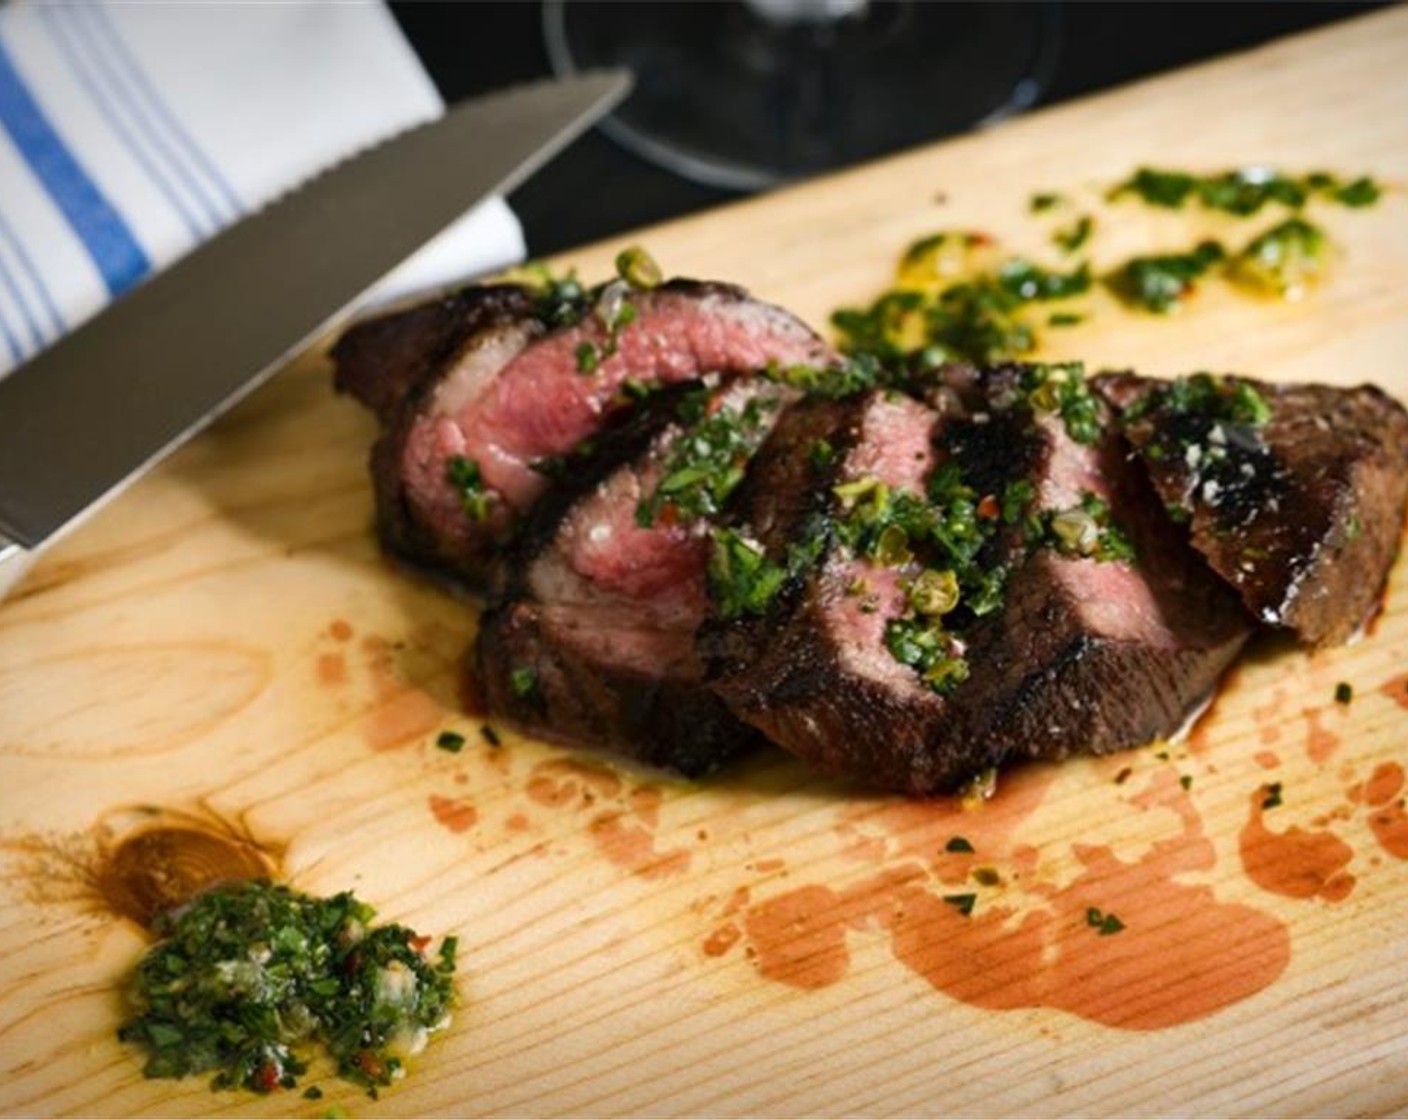 step 8 Transfer the steak to a carving board. Rub a generous amount of the chimichurri into both sides of the steak and let it rest 5 to 10 minutes before carving. If desired, serve with my preserved lemon chimichurri sauce from SideChef.